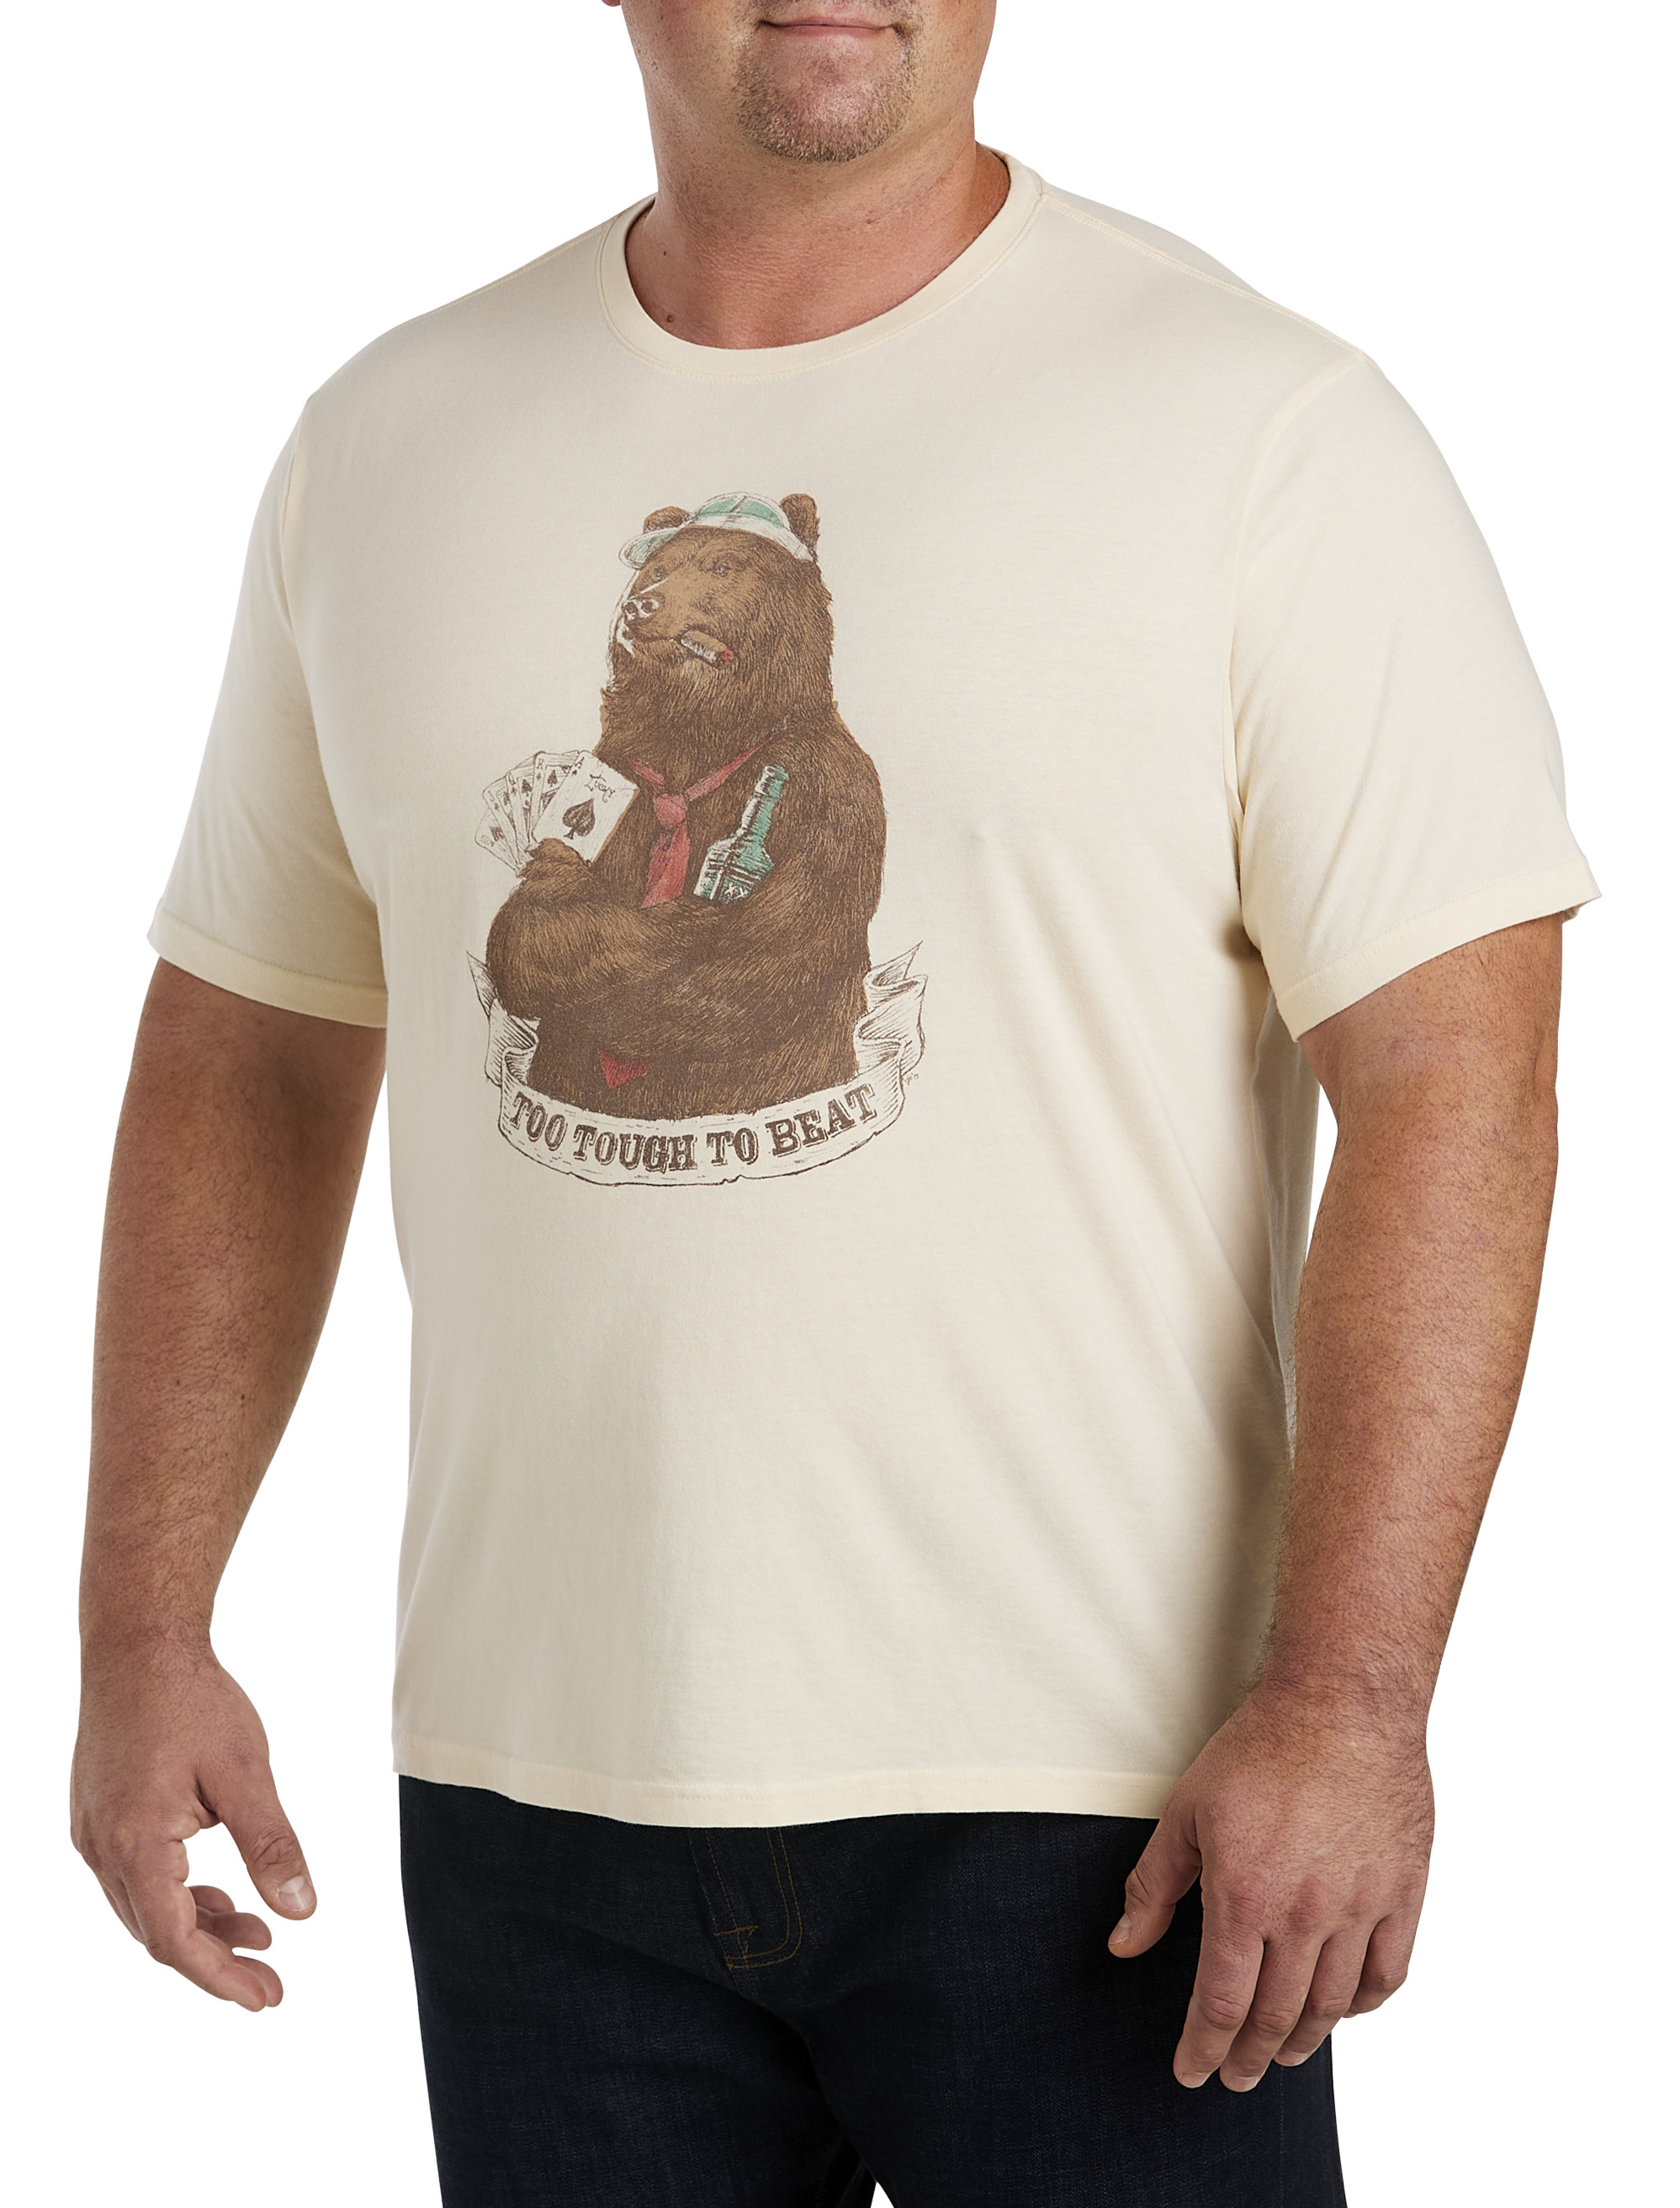 Lucky Brand Men's Gambling Bear Graphic Tee, Pearled Ivory, Small